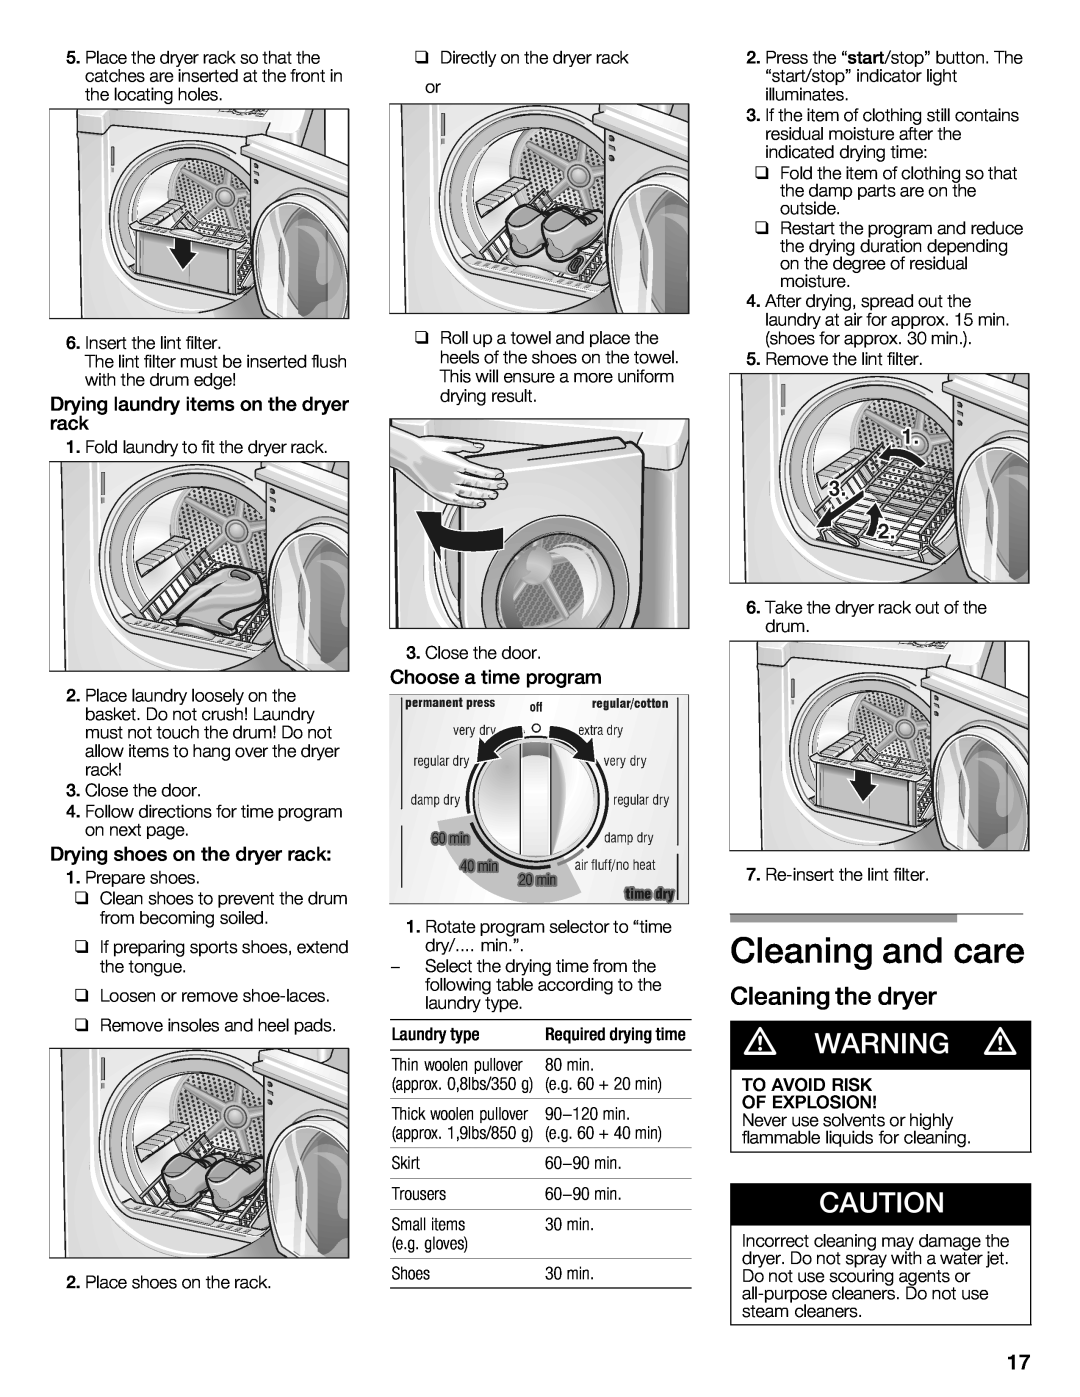 Bosch Appliances WTXD5321CN, WTXD5321US installation instructions Cleaning and care, d WARNING d, Cleaning the dryer 